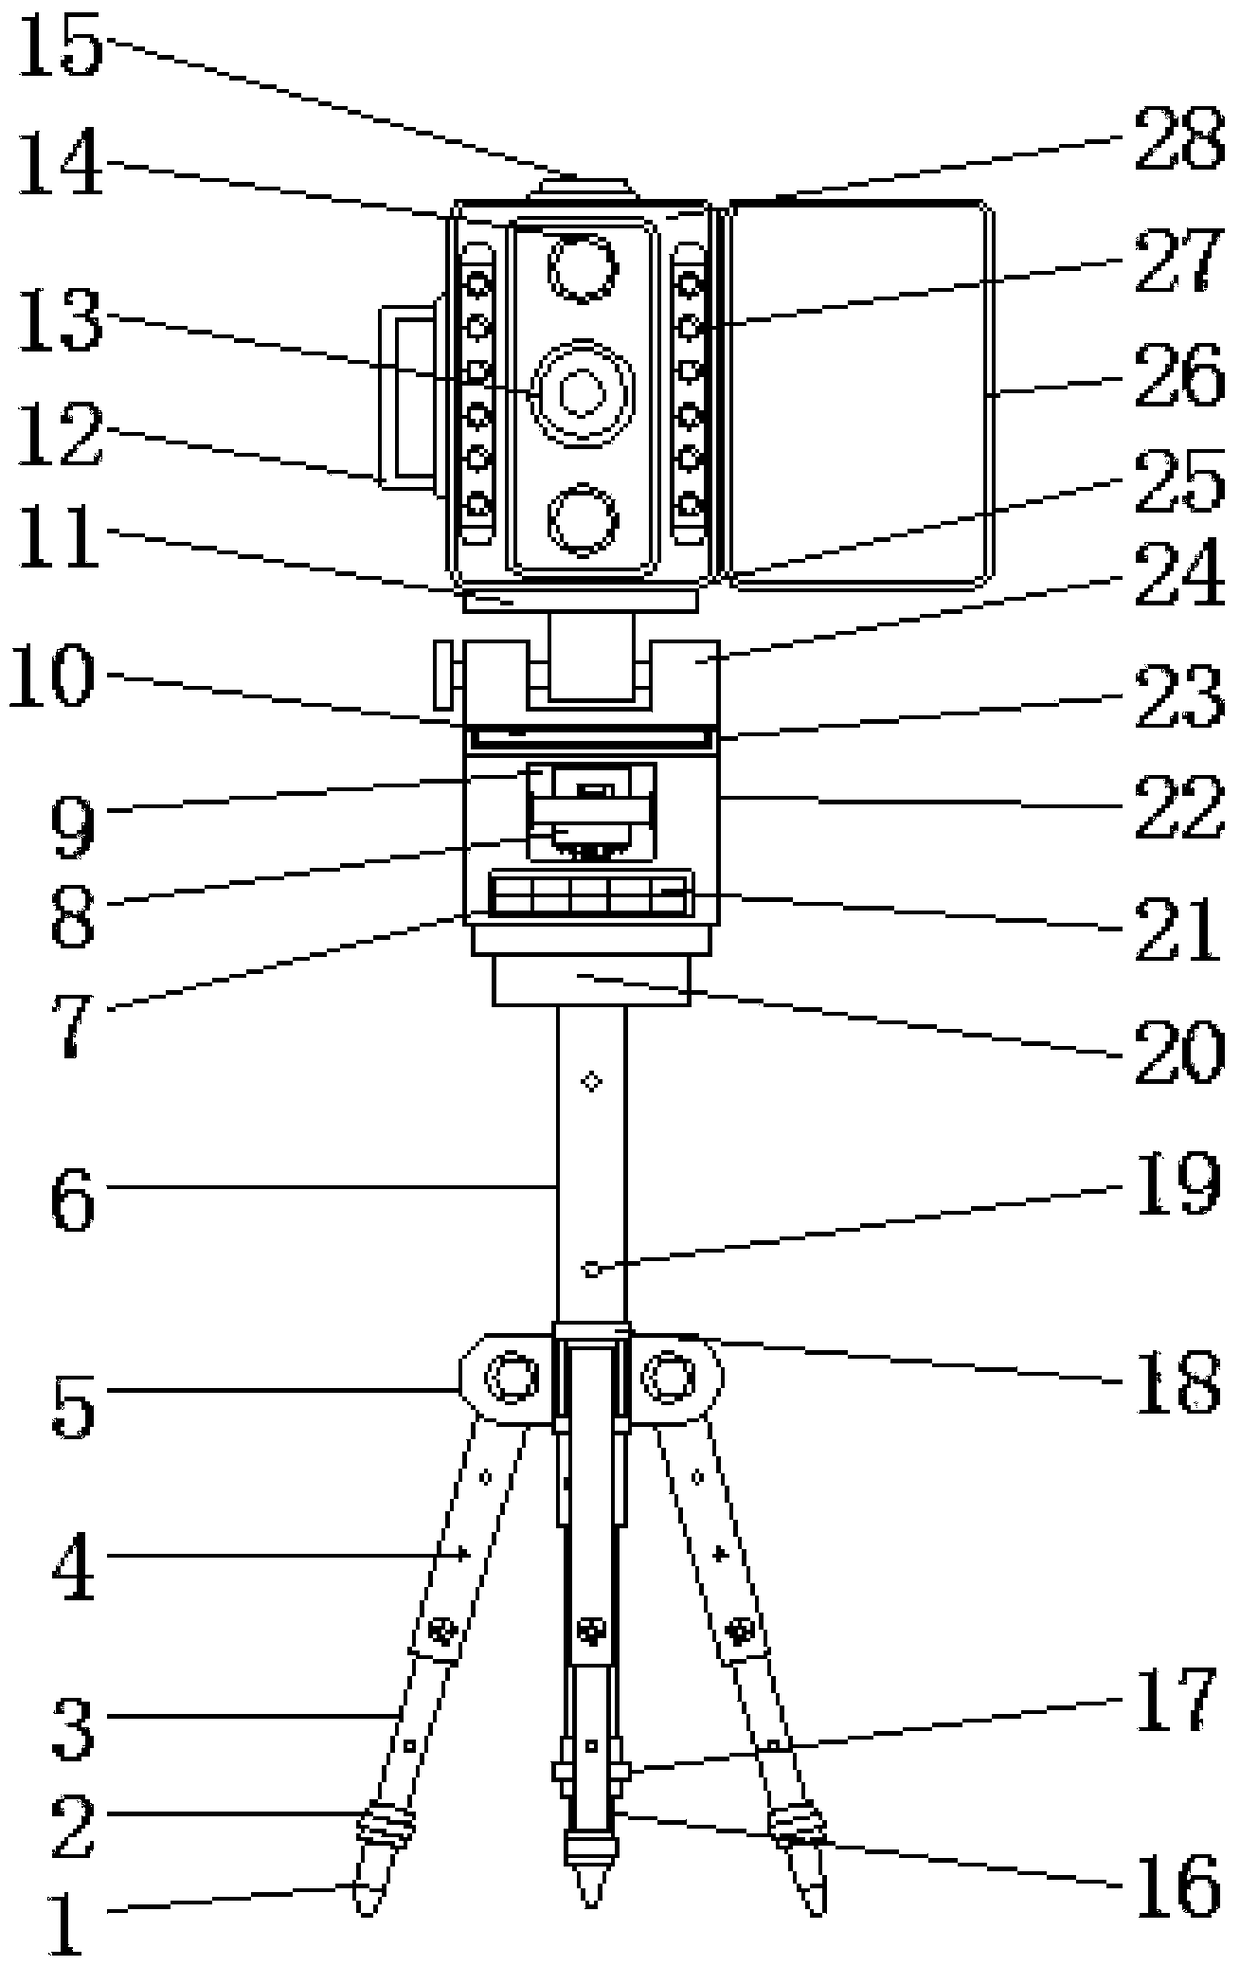 Three-dimensional laser scanner for surveying and mapping of mining subsidence area in coal mining area